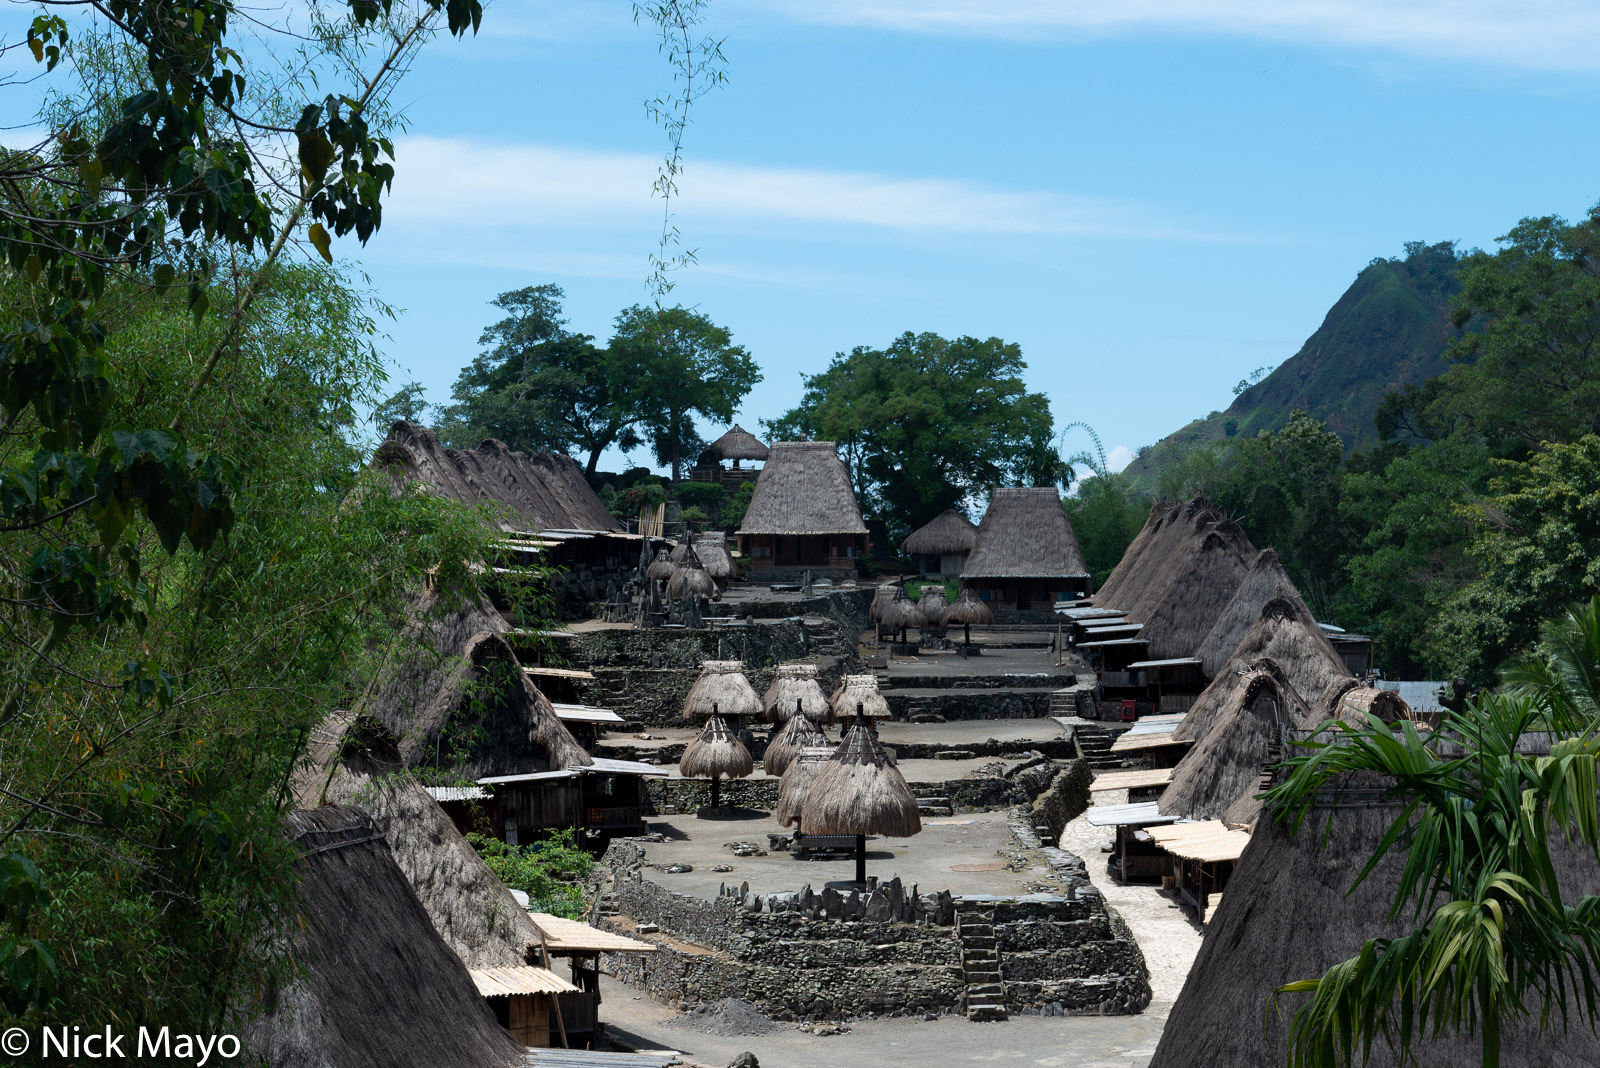 Thatched roof houses, bhaga and ngadhu in the Ngada Regency village of Bena.